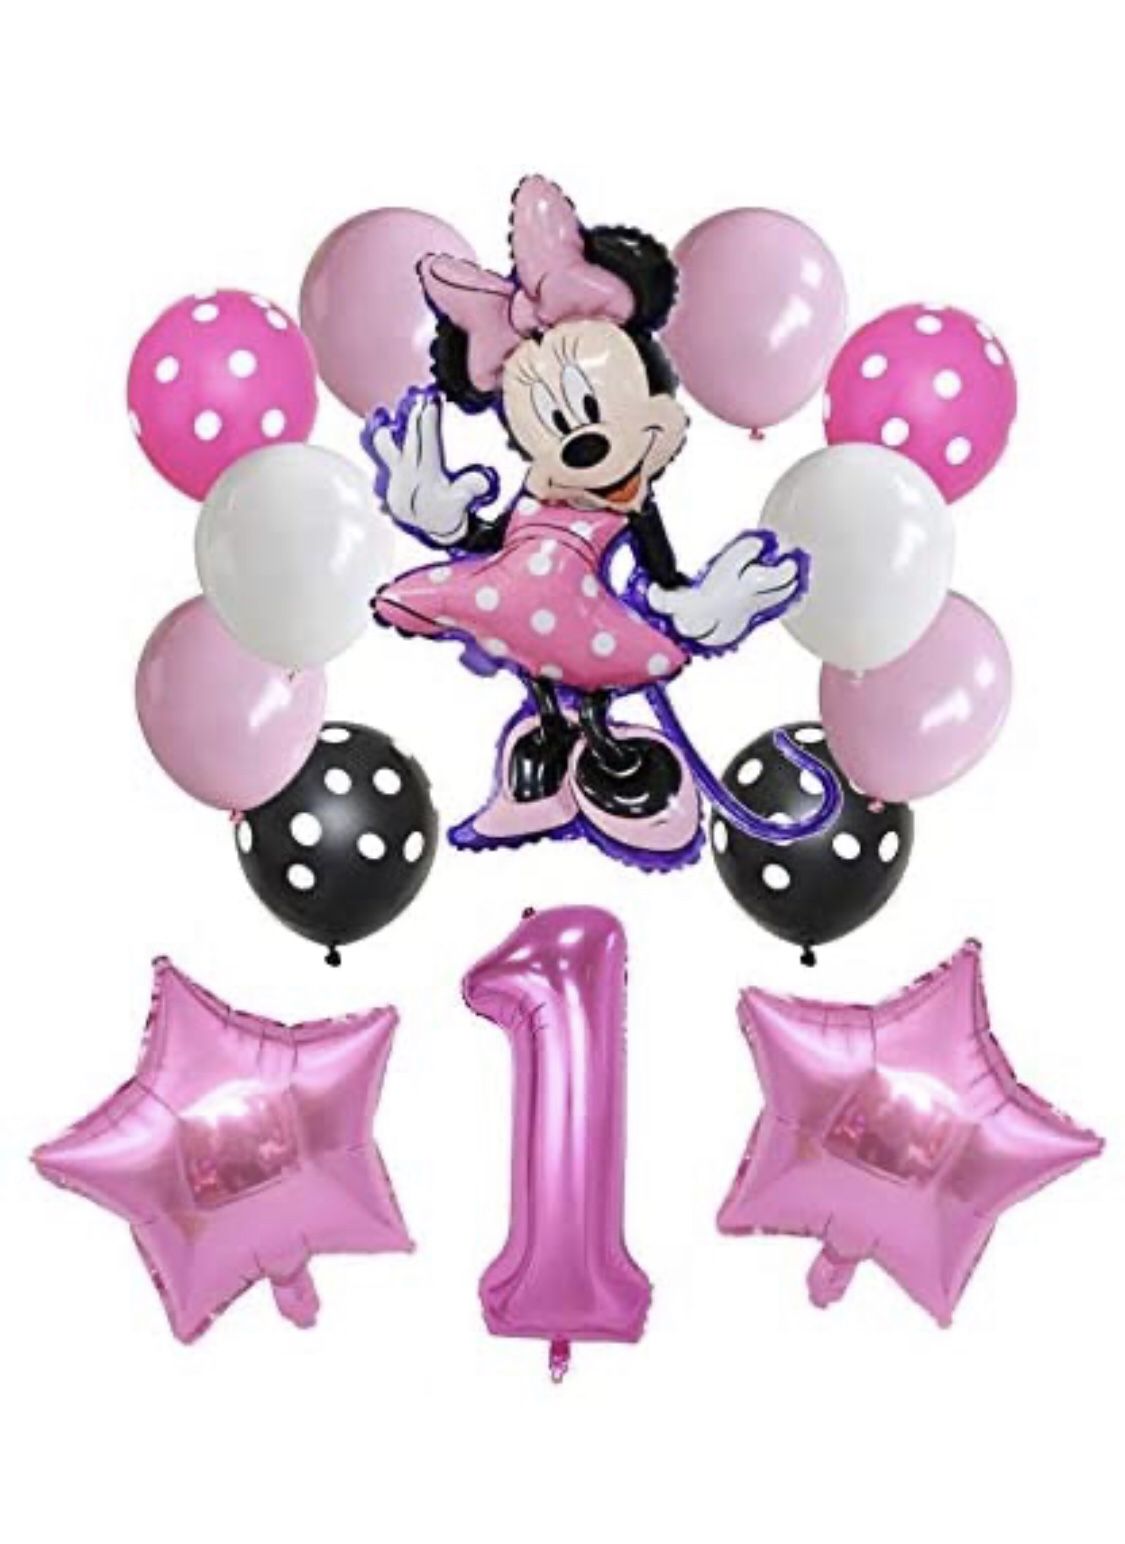 Minnie Mouse Balloon Set For 1st Birthday 